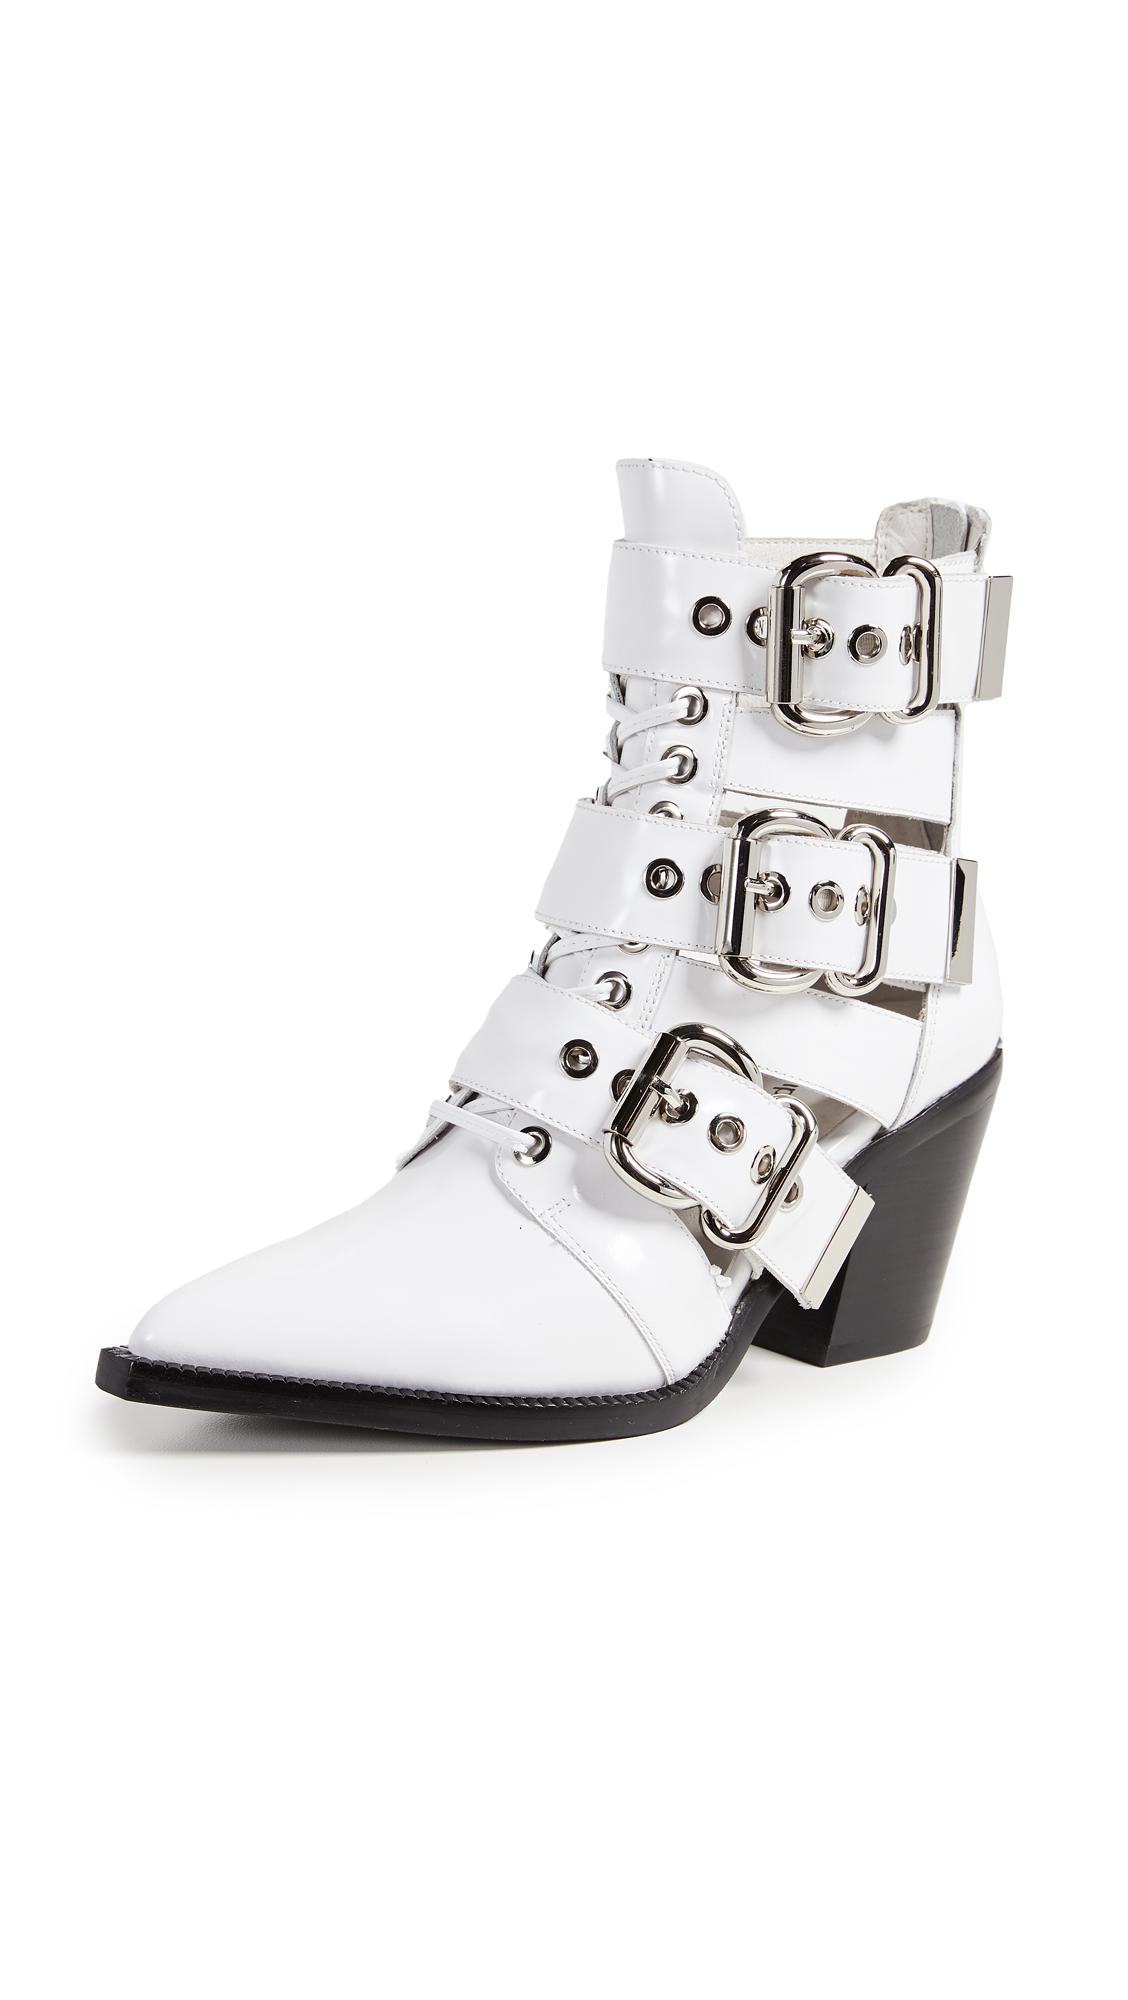 Jeffrey Campbell Leather Caceres Buckle Booties in White - Lyst